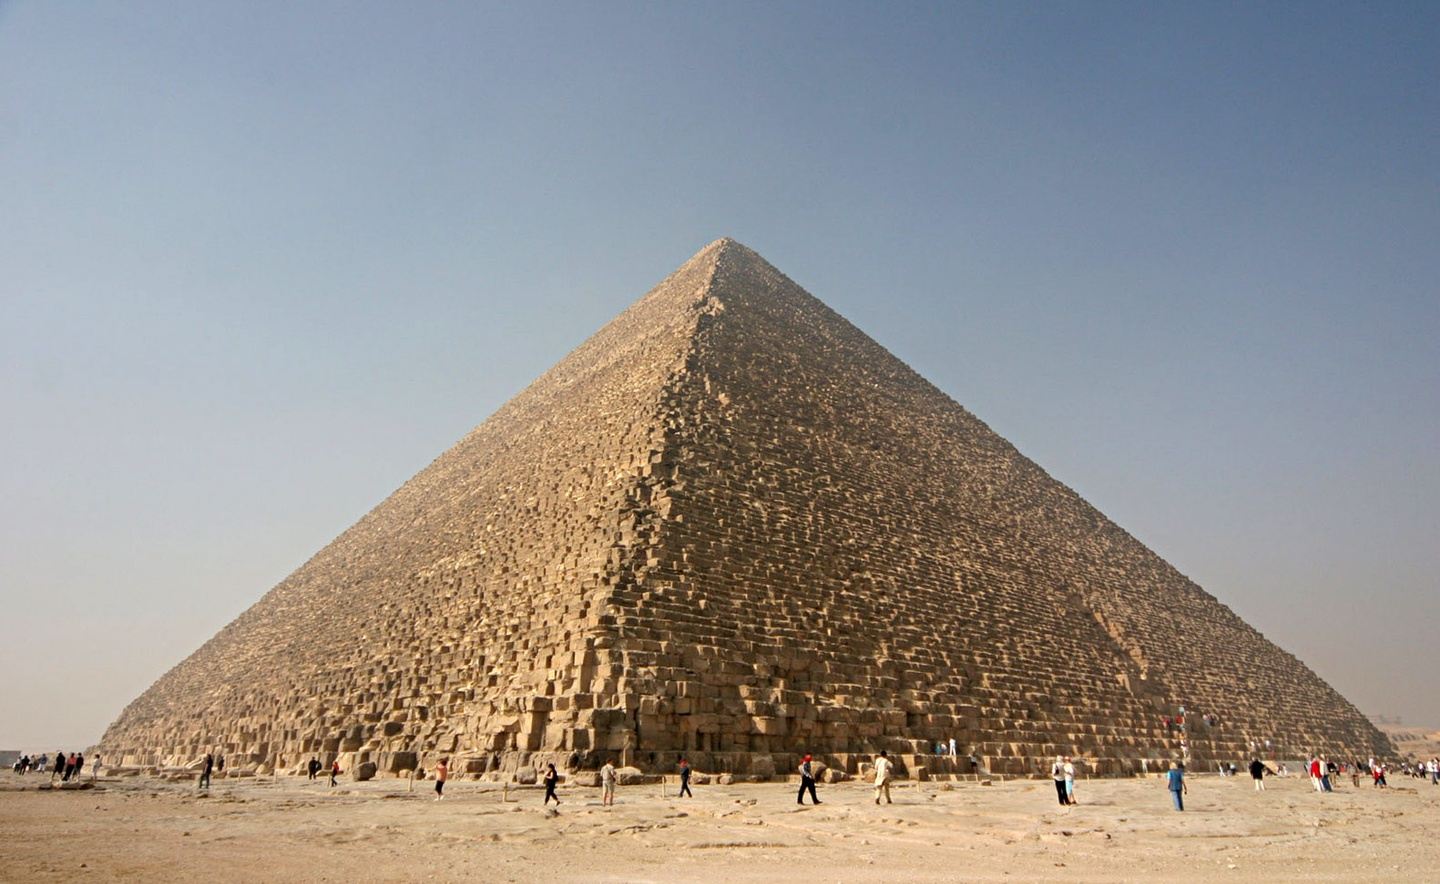 Private visit to the Great Pyramid